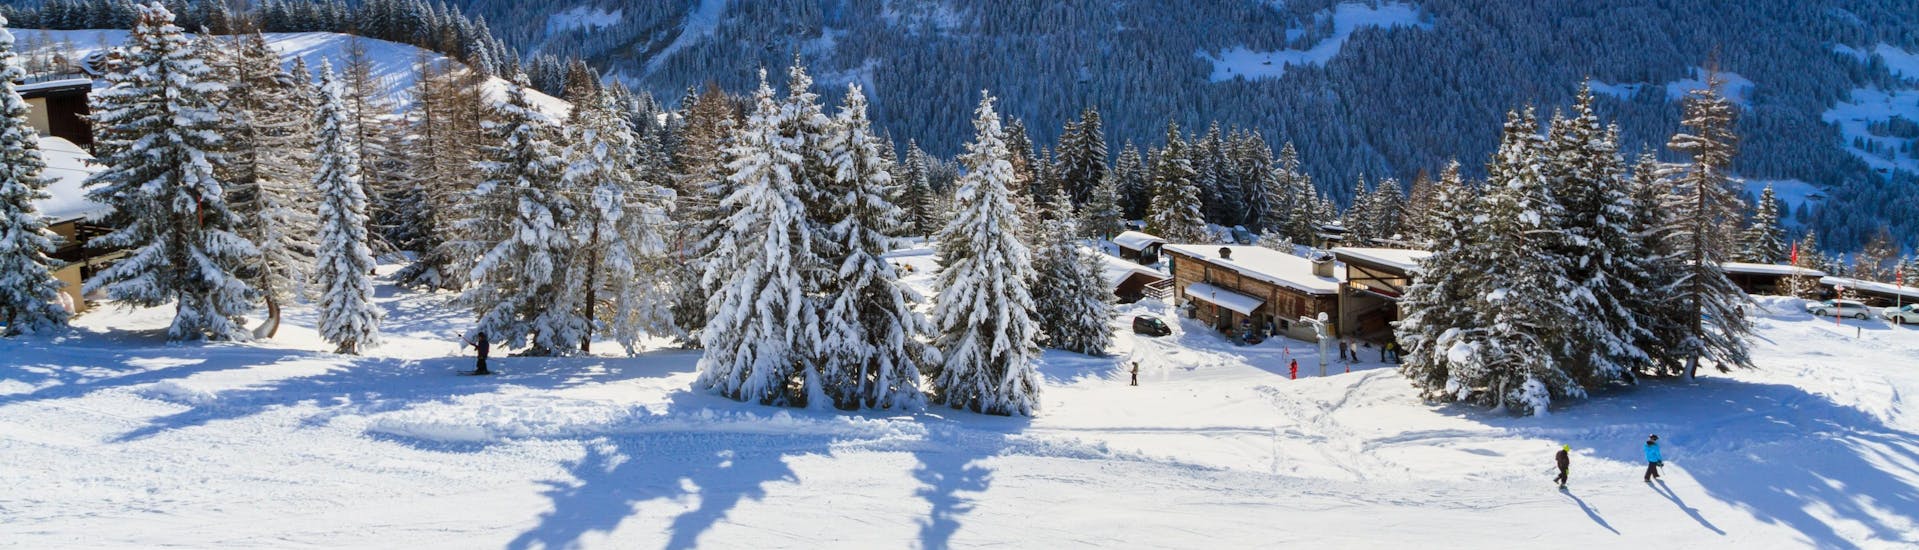 A panoramic view of the ski slopes and the surrounding mountains of Villars, a popular Swiss ski resort where visitors can book ski lessons with one of the local ski schools.